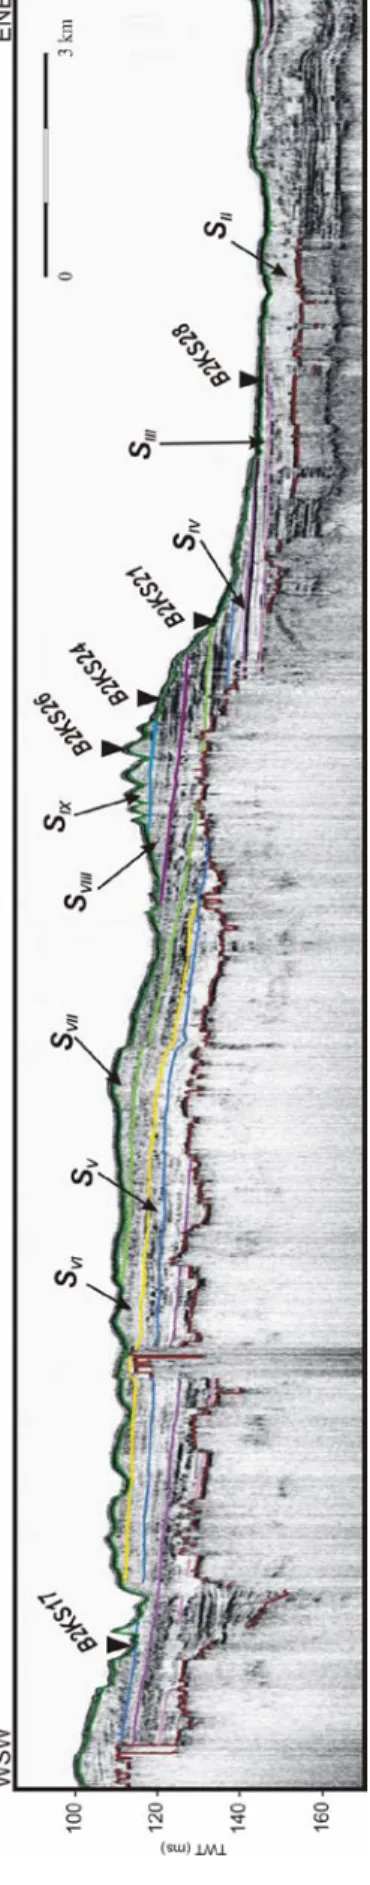 Figure 5: Chirp line B2ch088 and its interpretation. Cores recovered on the line are positioned on the profile (named B2KSxx)